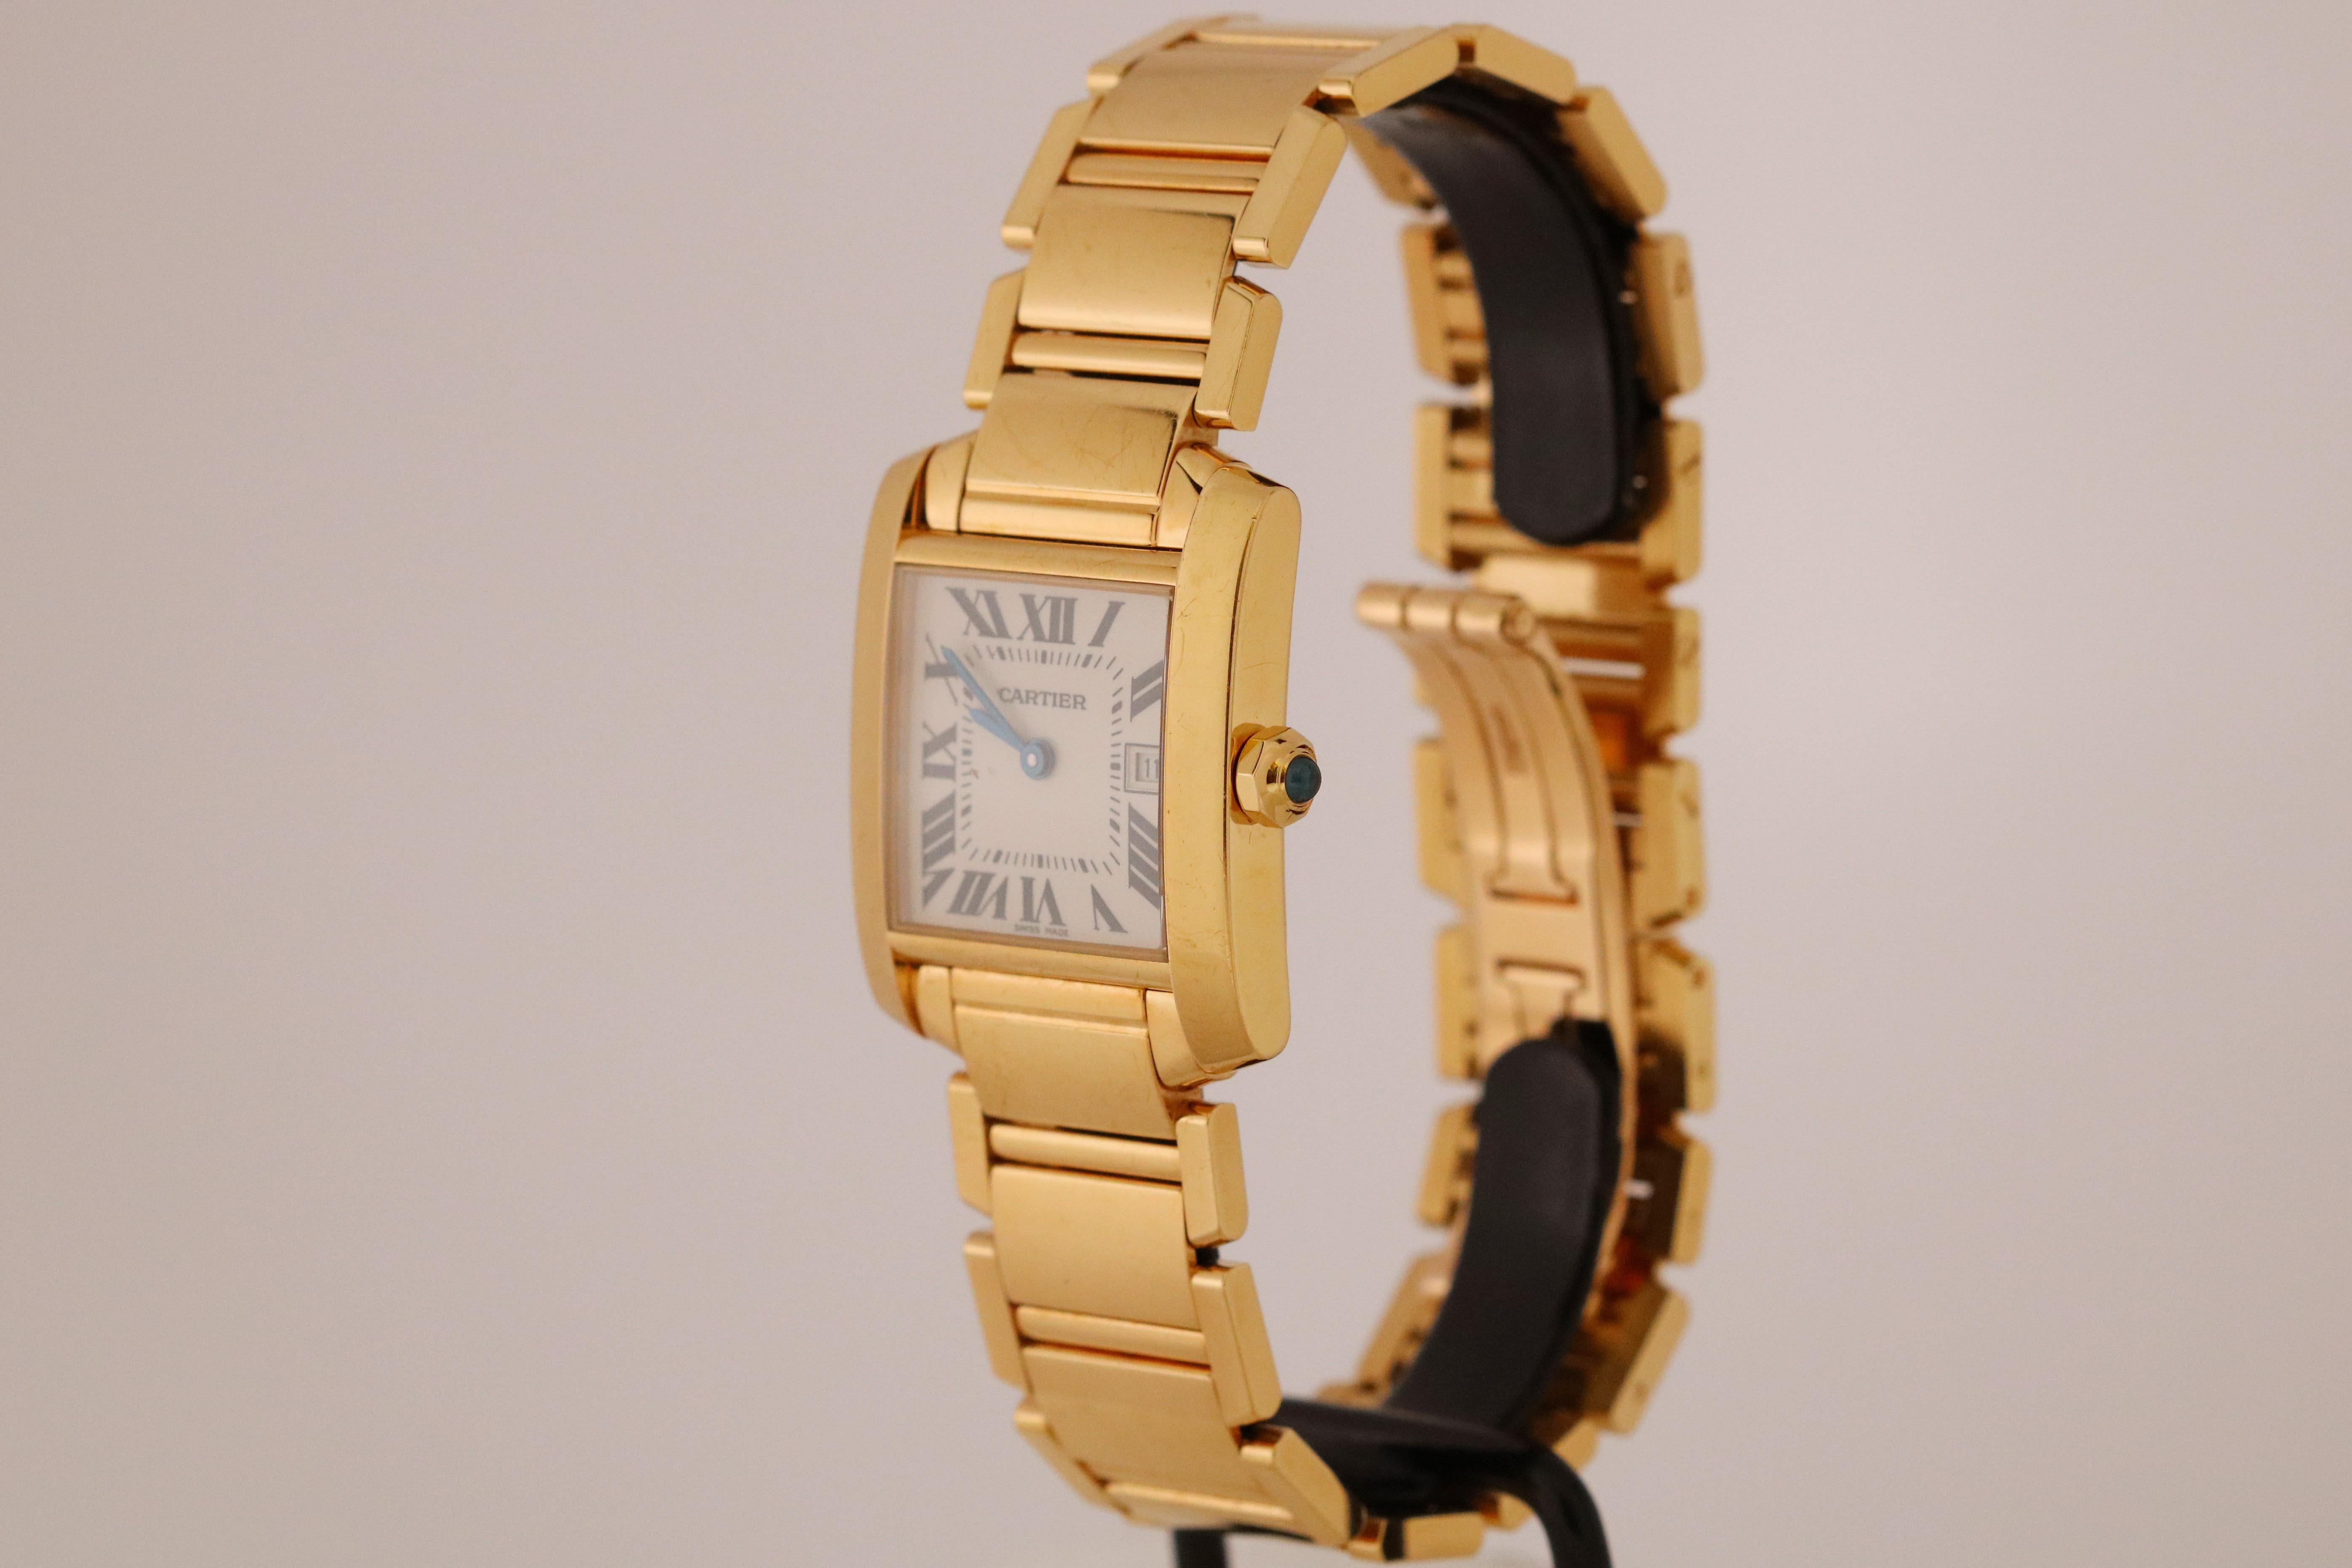 Cartier Tank Francaise ref. W50014N2 in yellow gold with a quartz movement and date aperture. Bracelet appears to be fully linked. Comes with box.   22 mm x 25 mm